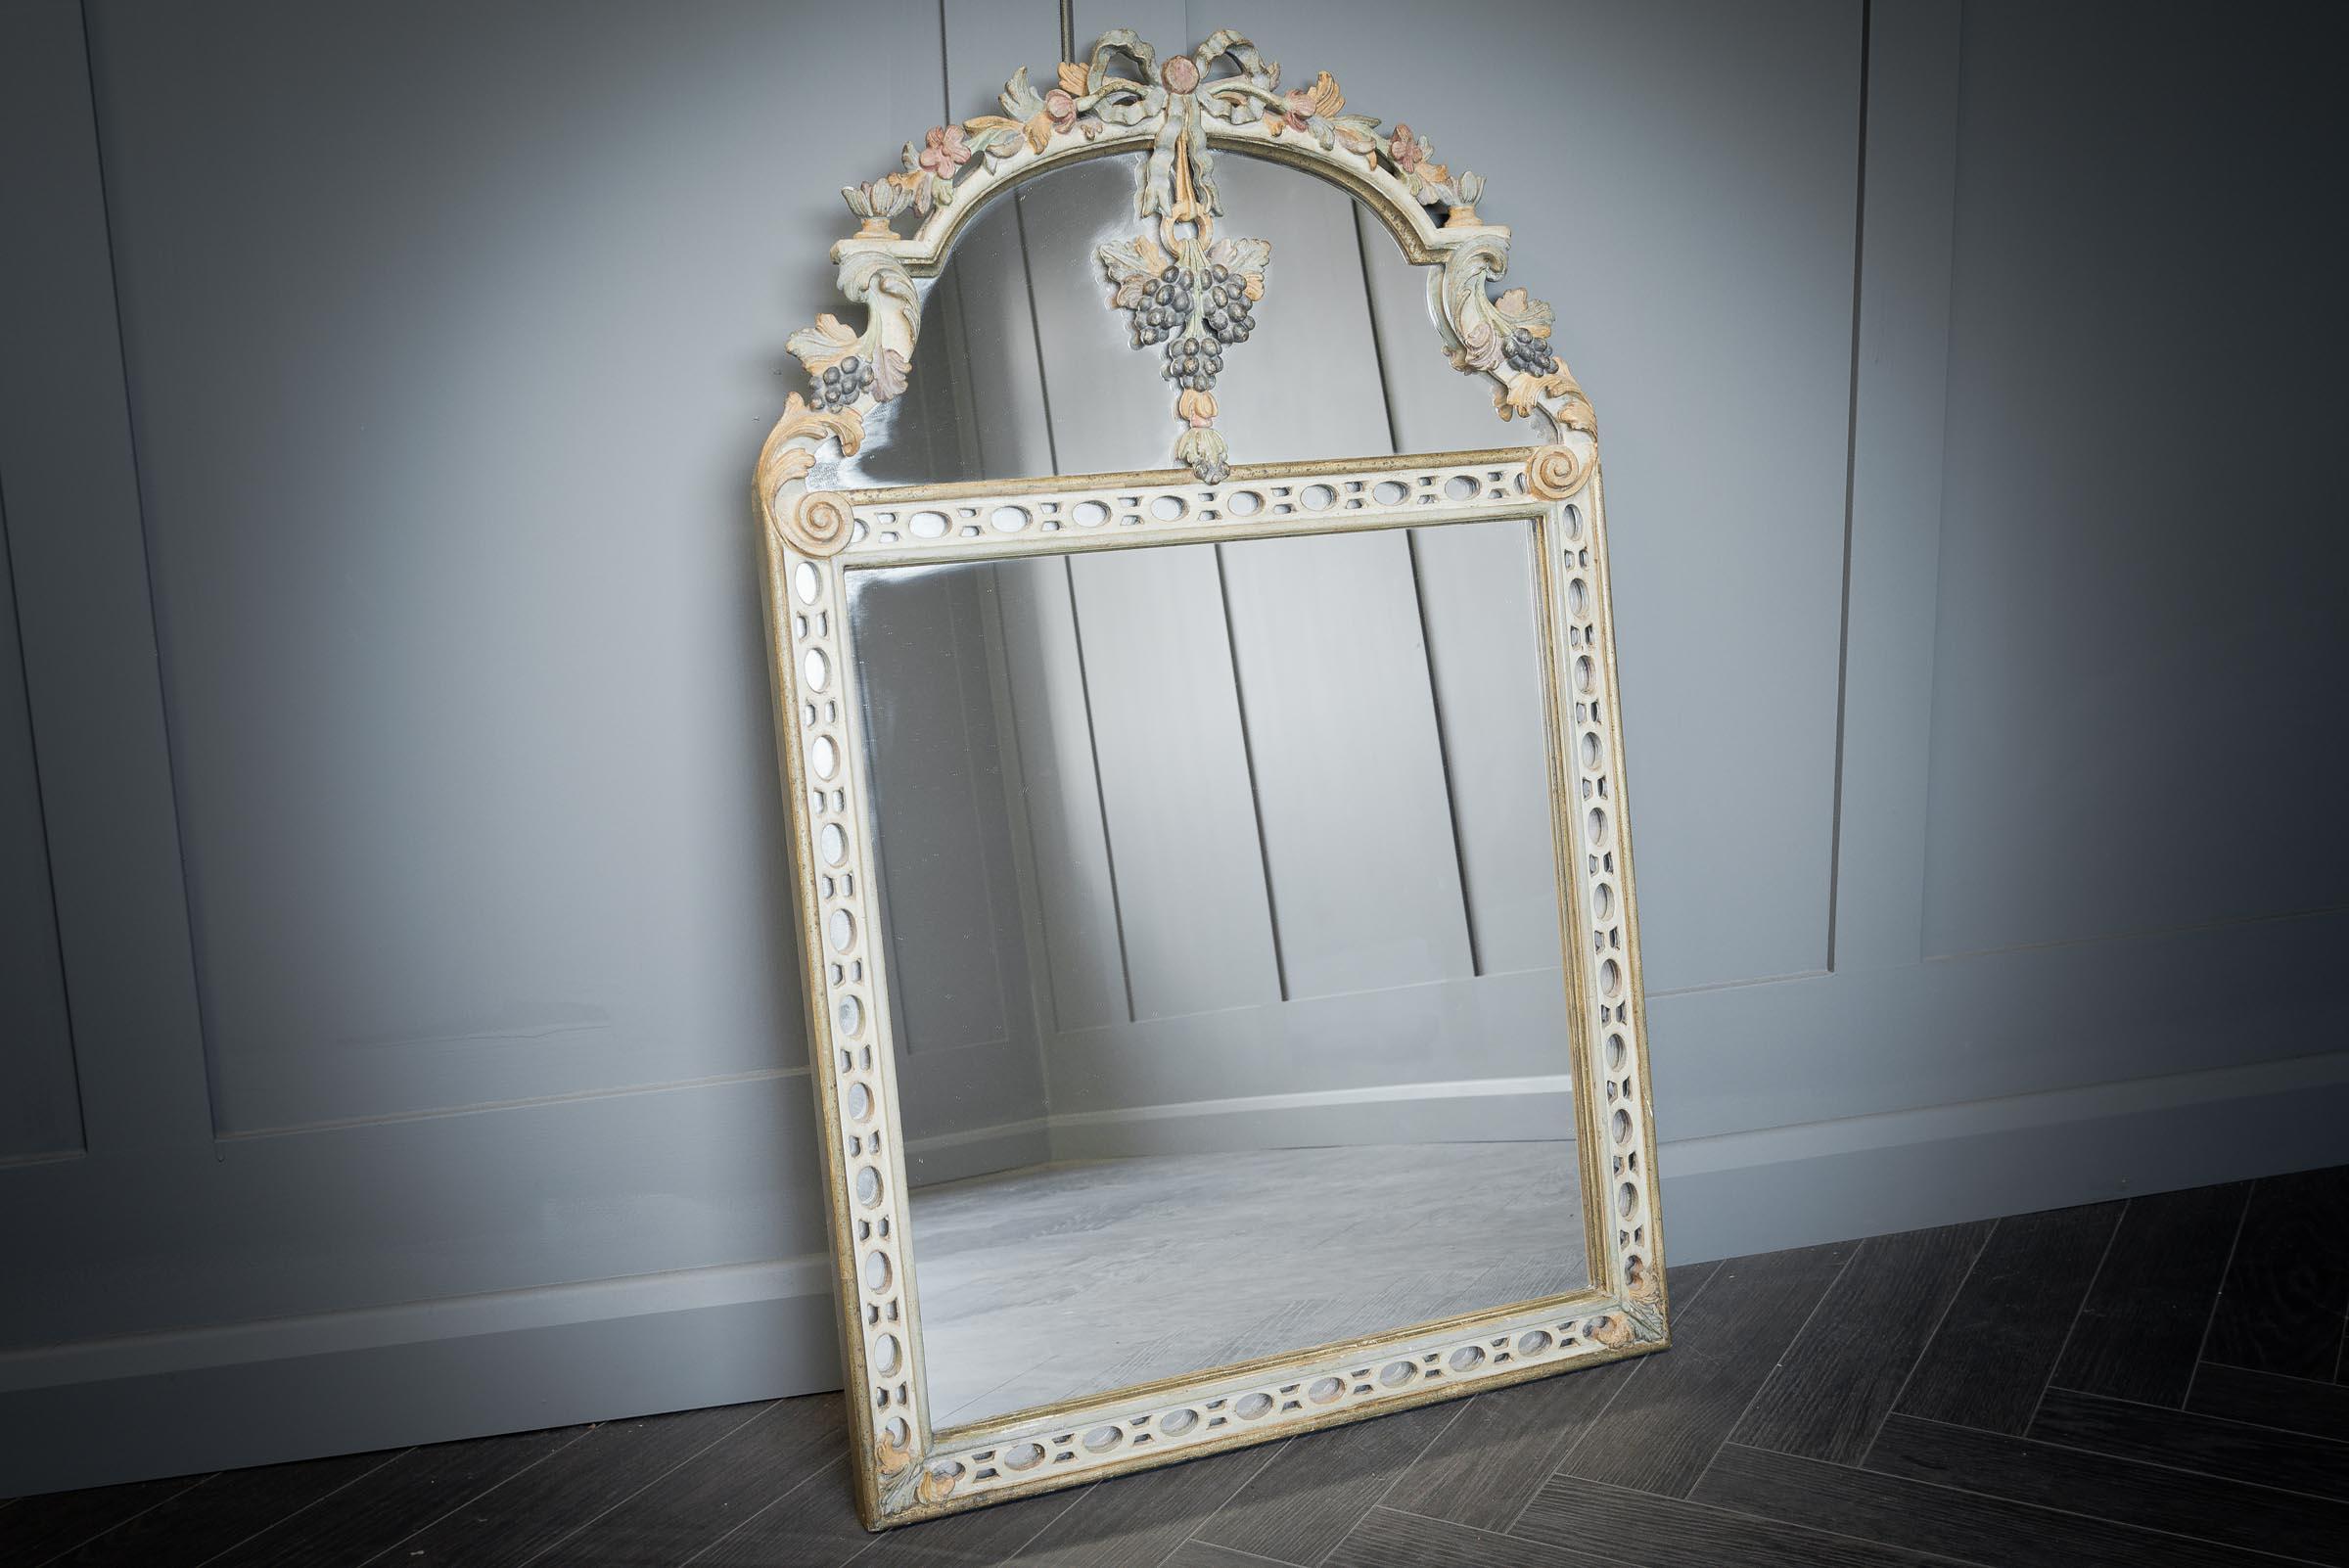 This dainty and elegant wooden hand carved mirror would be a perfect addition to any bedroom or hall. The delicate floral carvings add a feminine softness to the mirror.